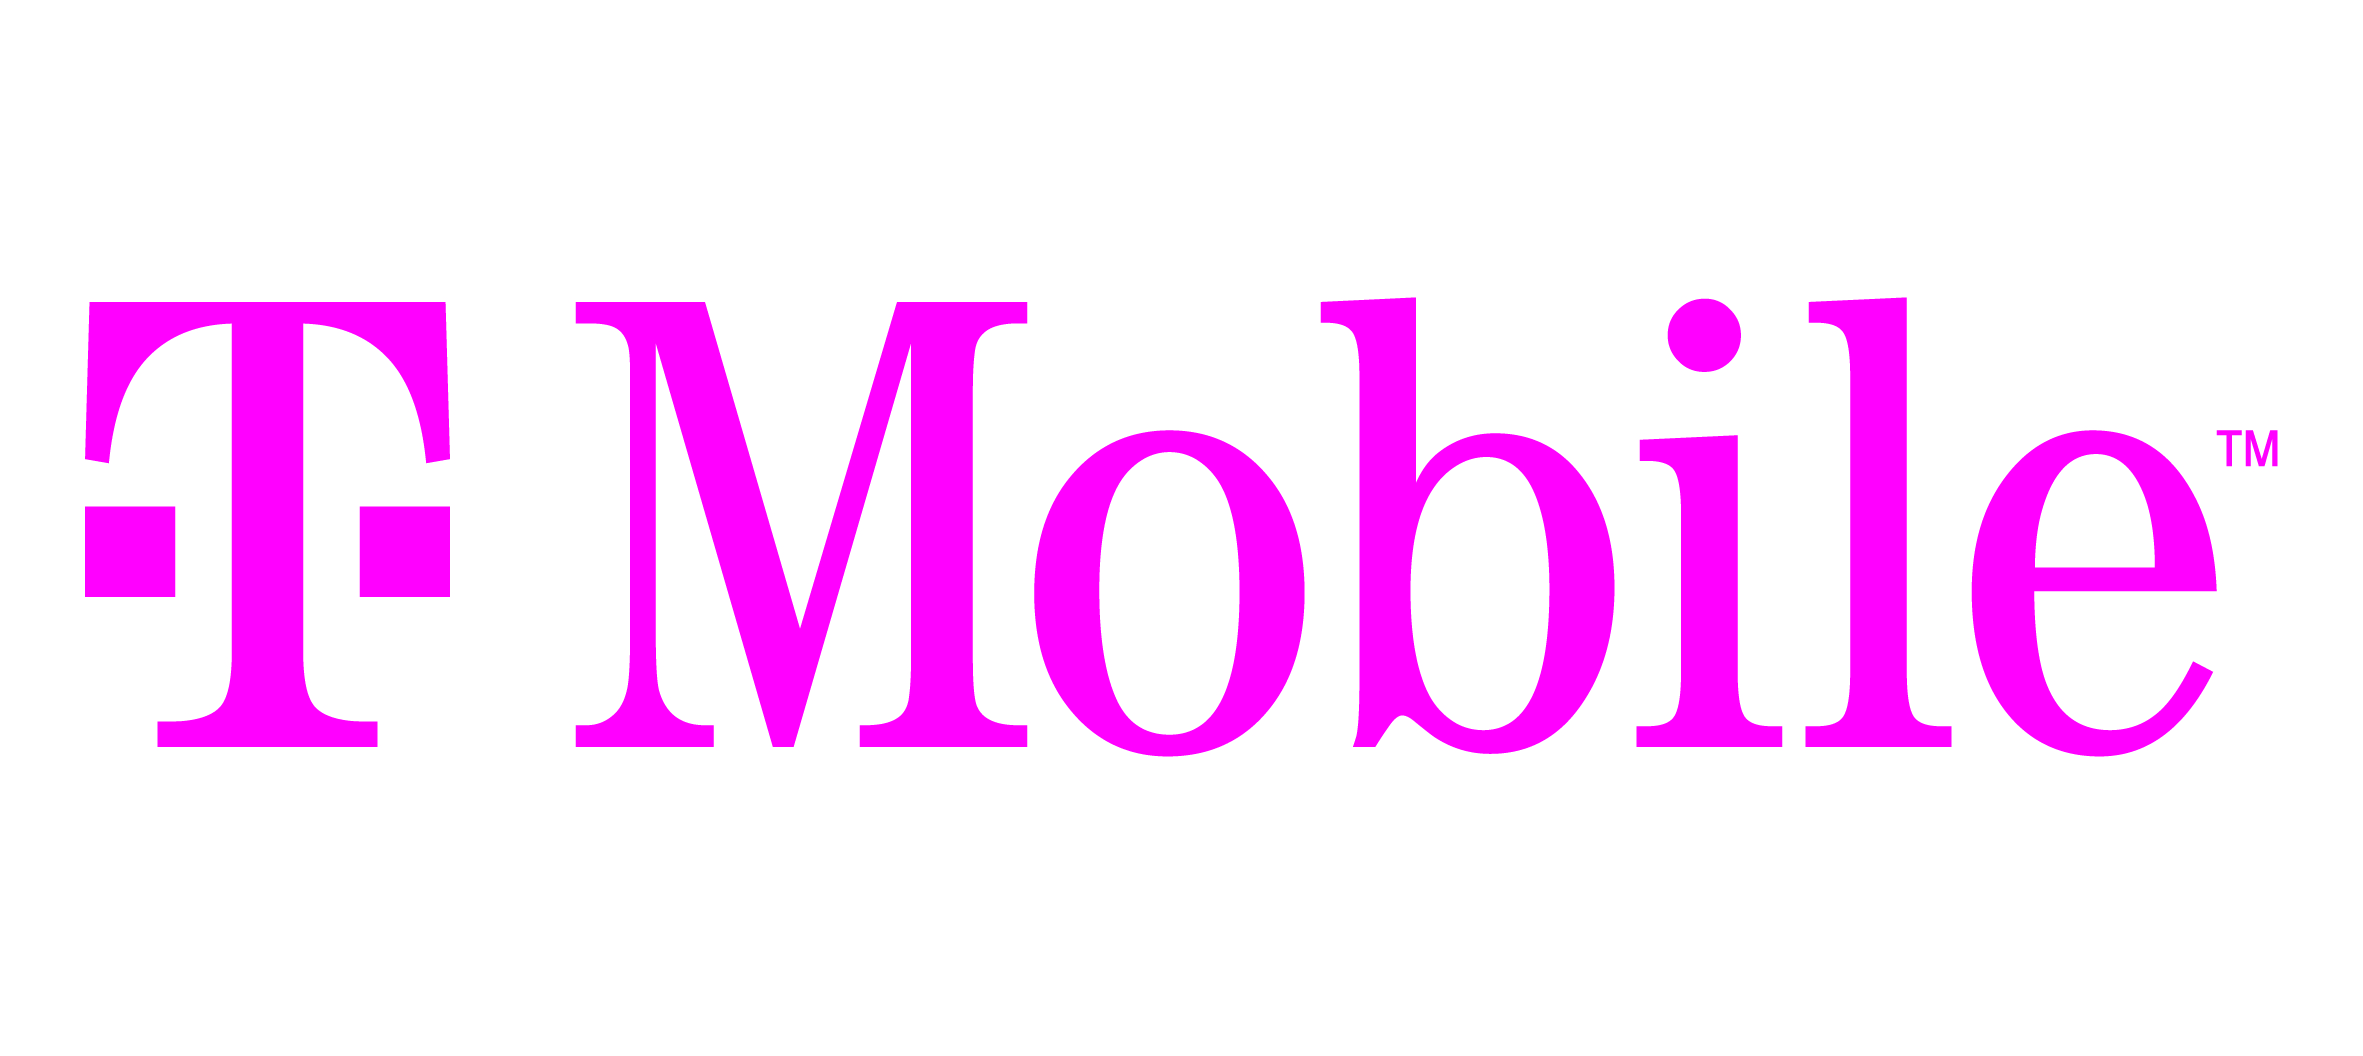 T Mobile New Logo Primary CMYK M on W 1 Houston Crime Stoppers